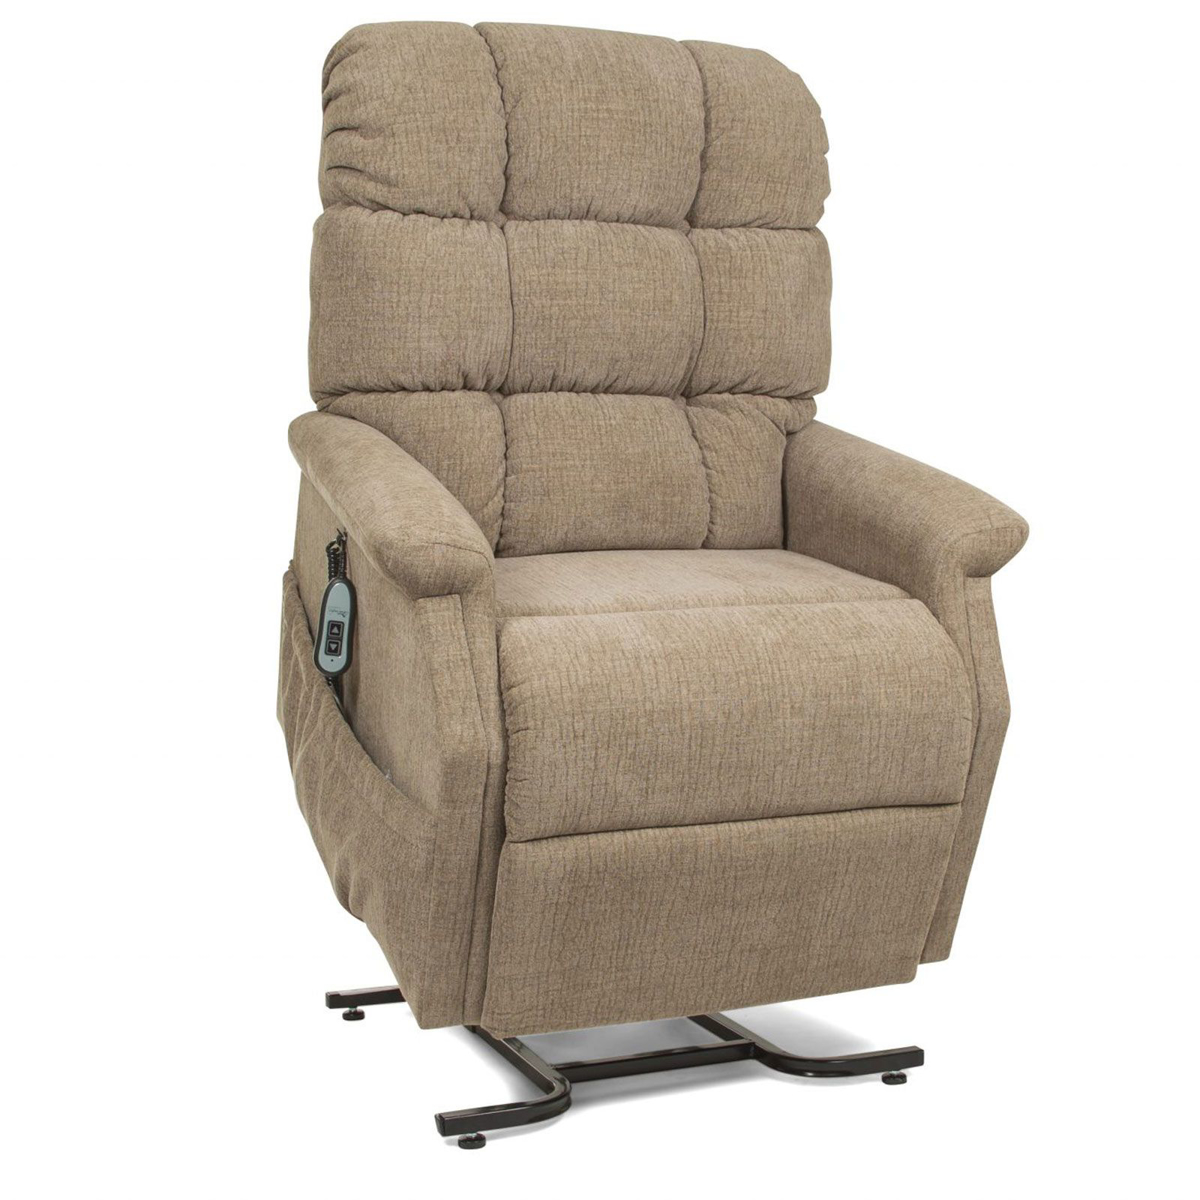 Picture of Tranquility Sand Lift Chair with Heat & Massage